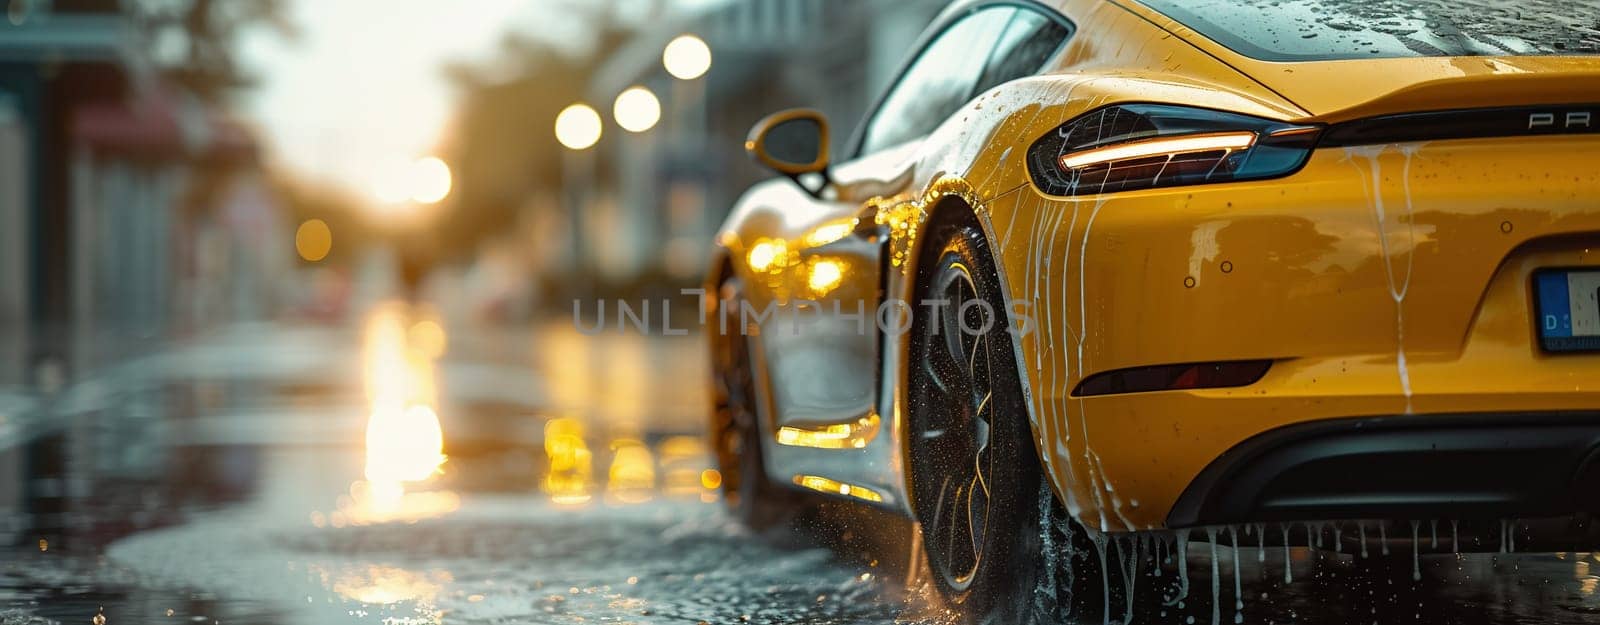 sports yellow car in the rain by Andelov13